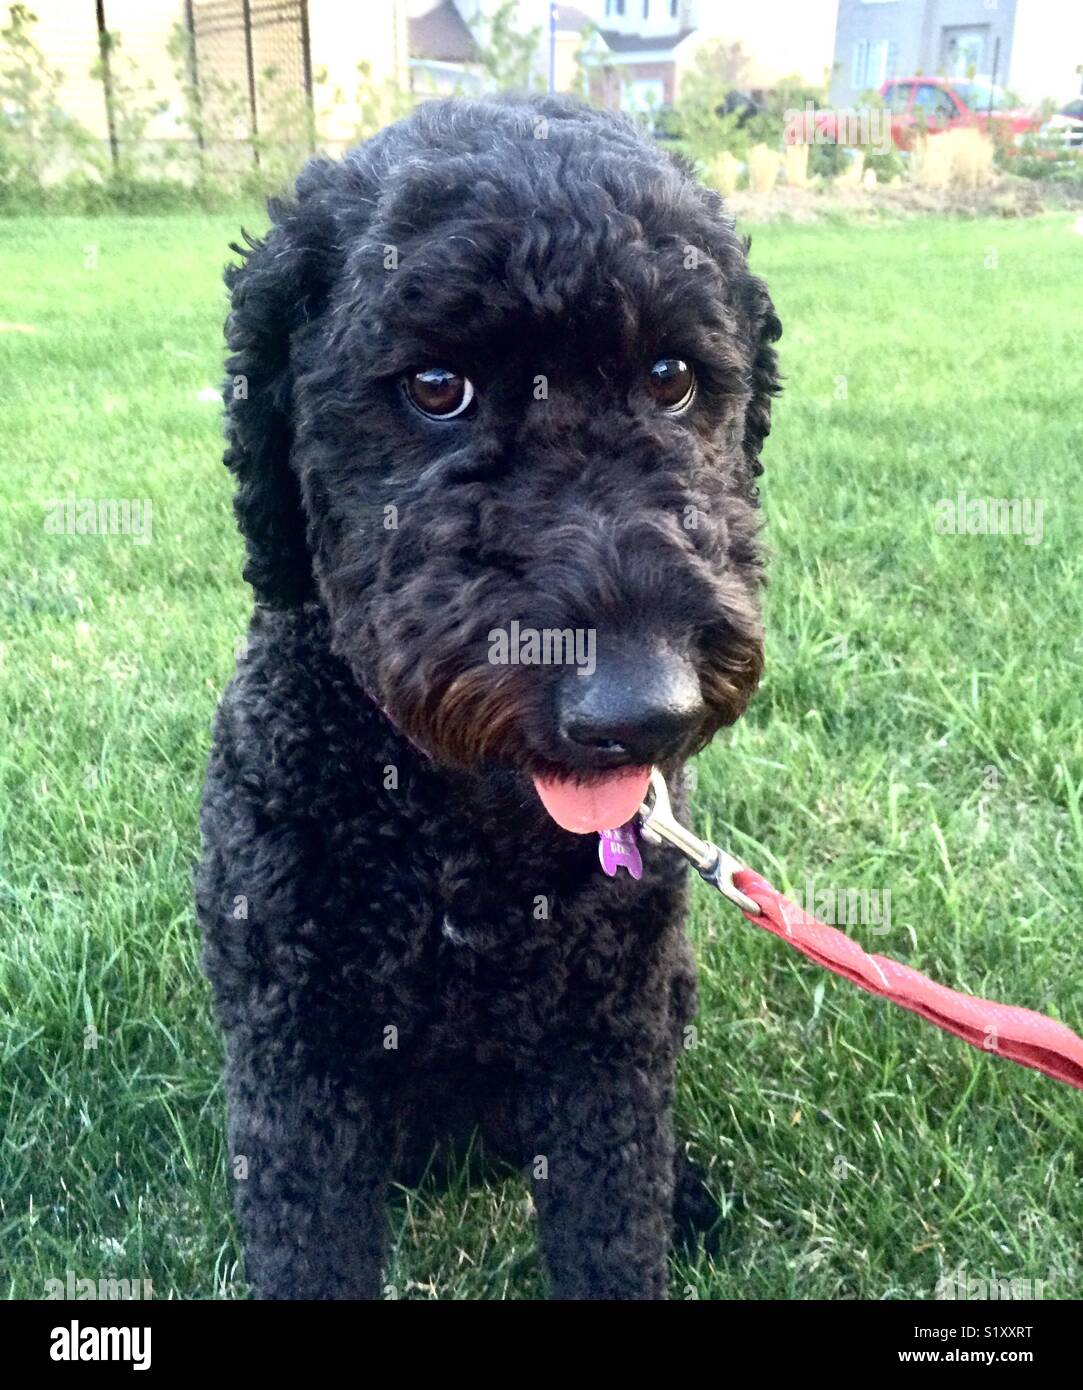 Smiling Portuguese water dog puppyc Stock Photo